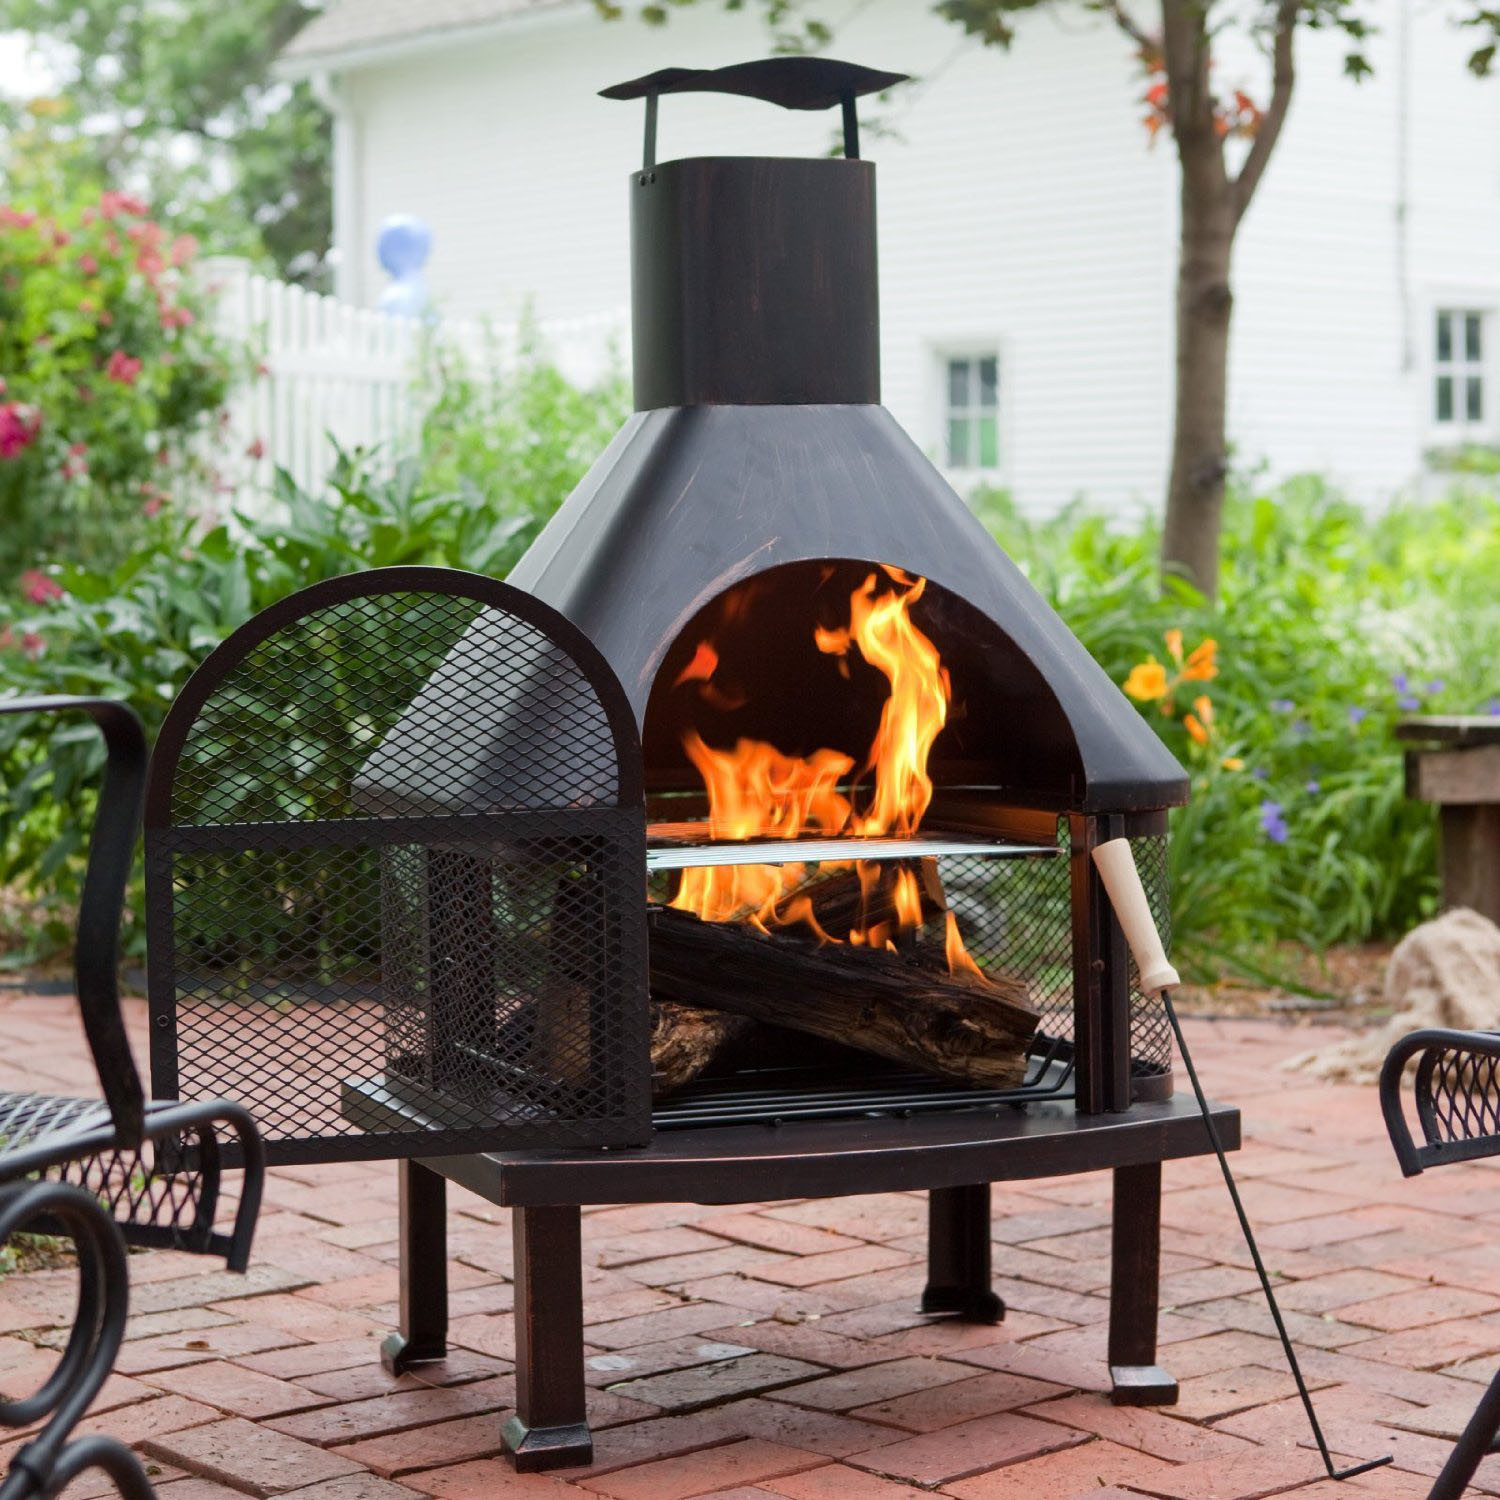 Outdoor Fireplace Or Fire Pit
 Outdoor Fire Pit Ideas For The Backyard